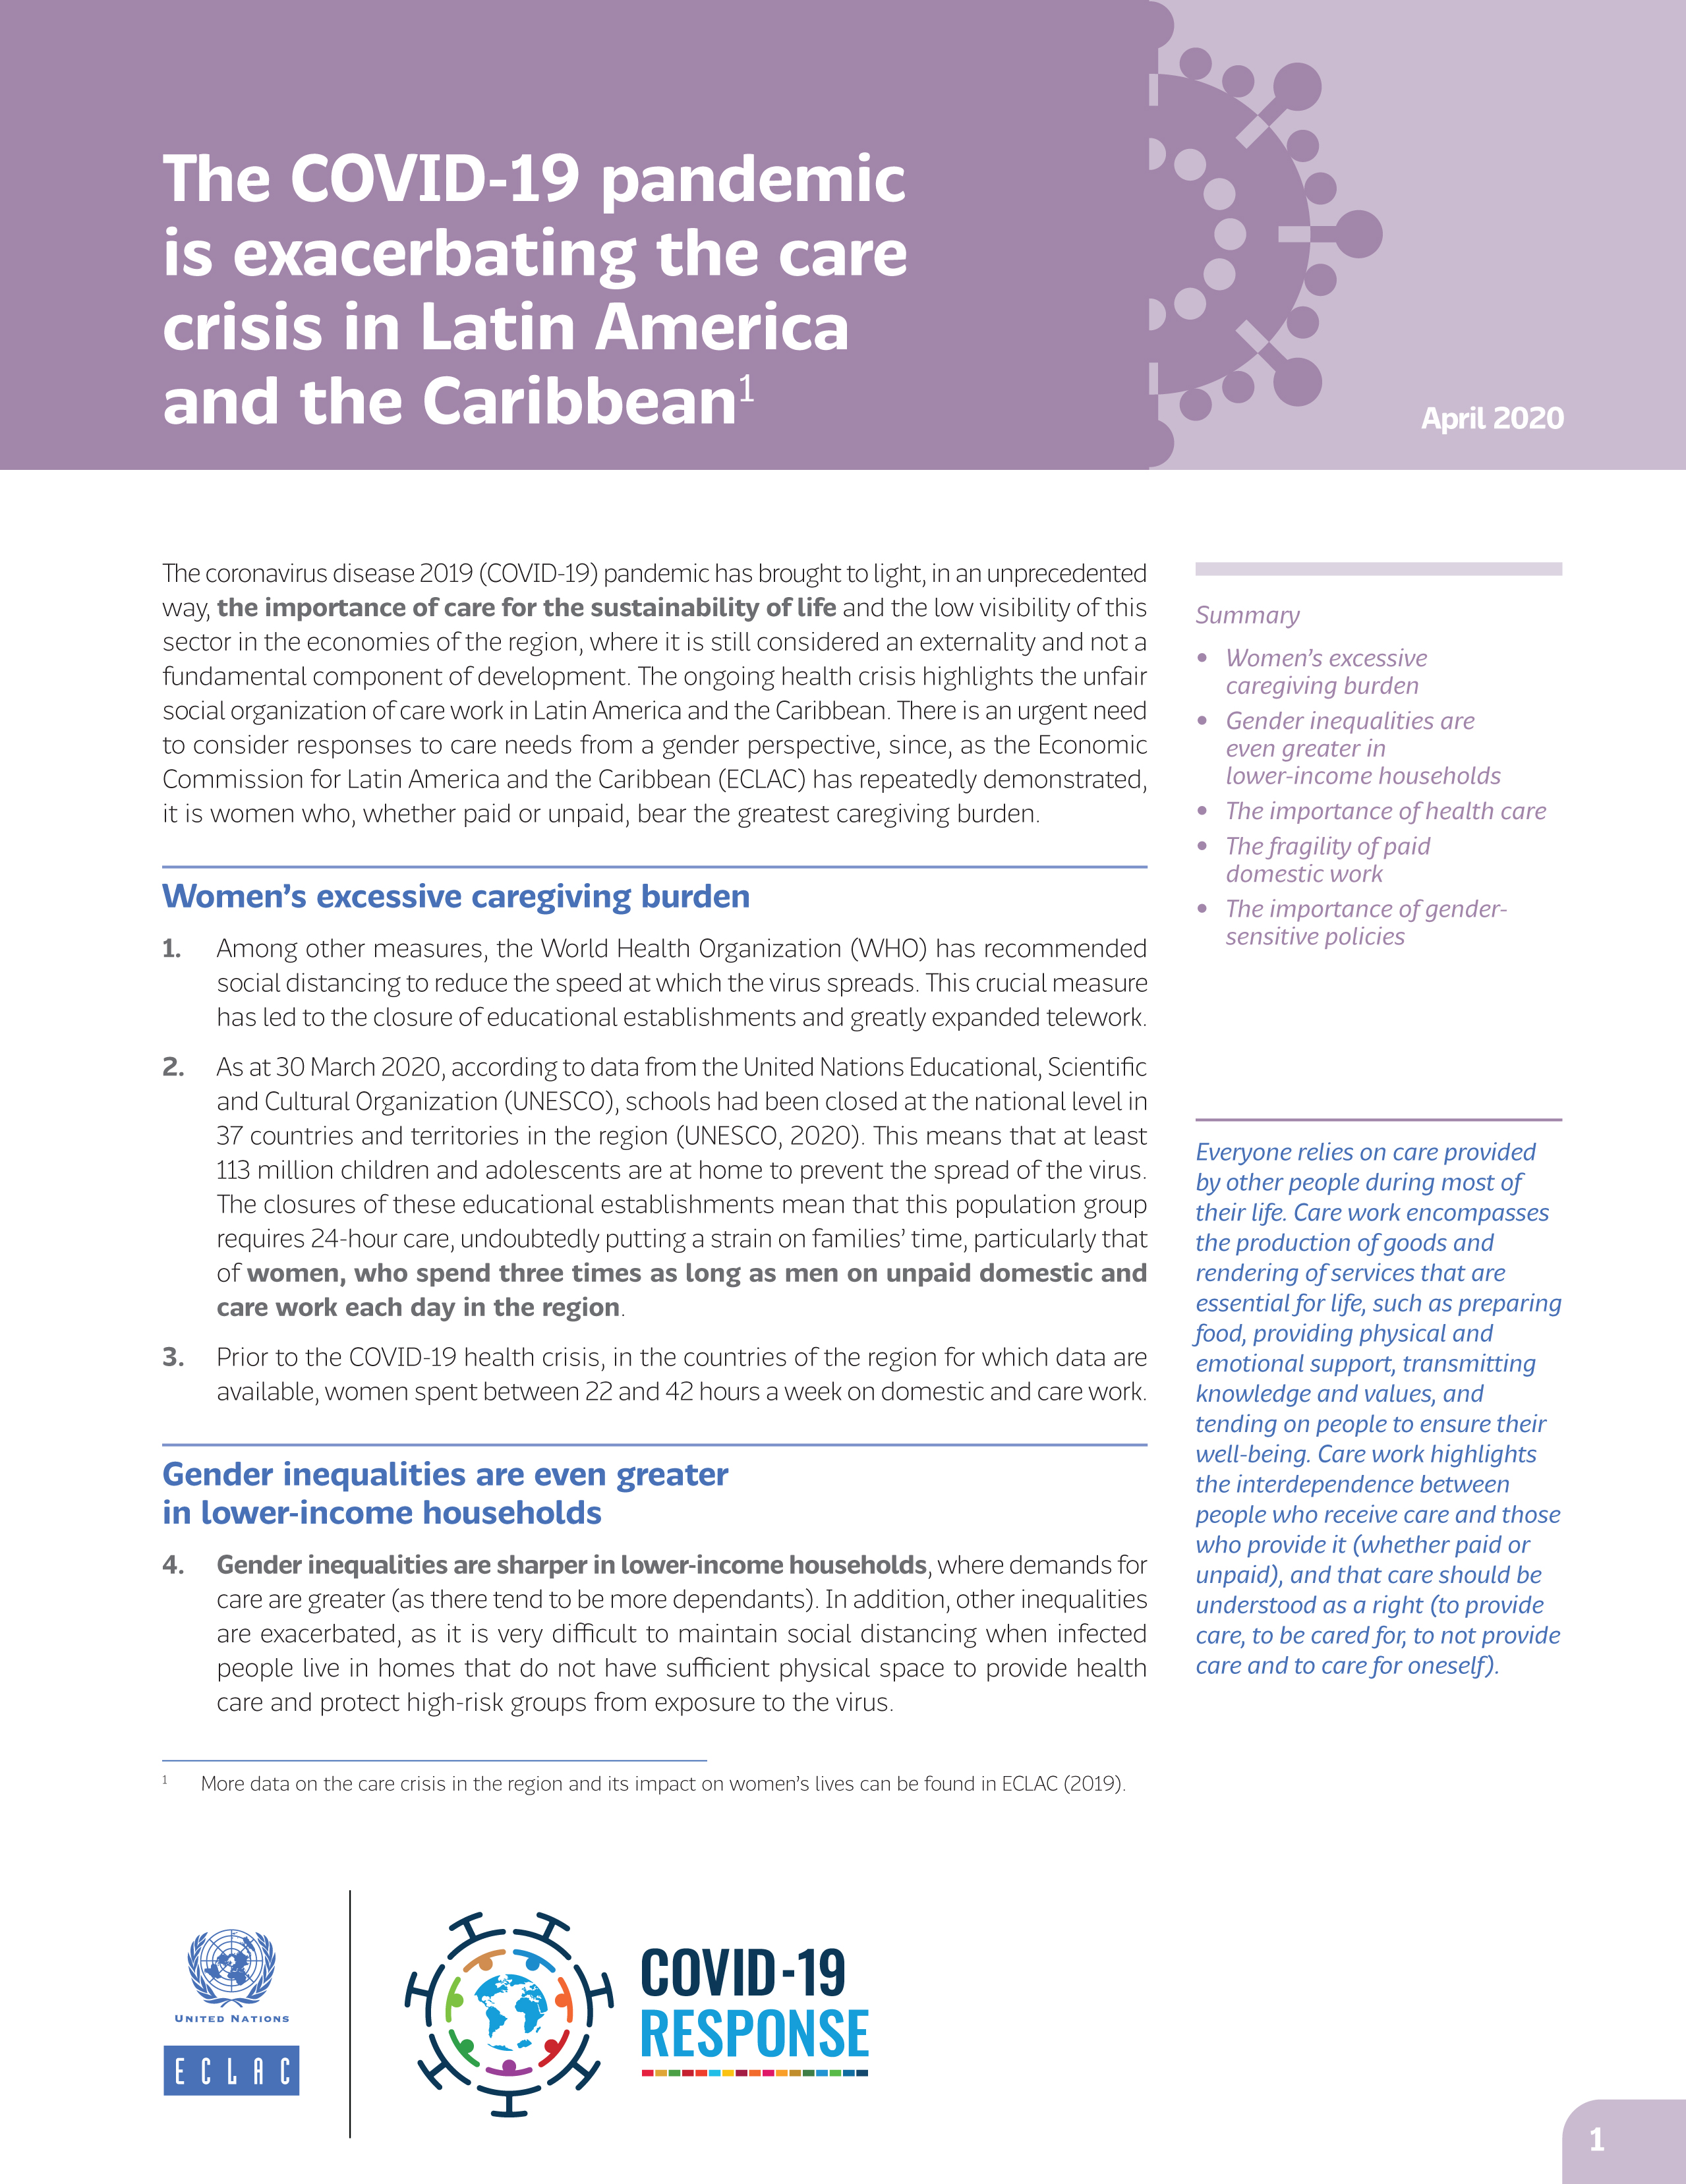 image of The COVID-19 Pandemic is Exacerbating the Care Crisis in Latin America and the Caribbean